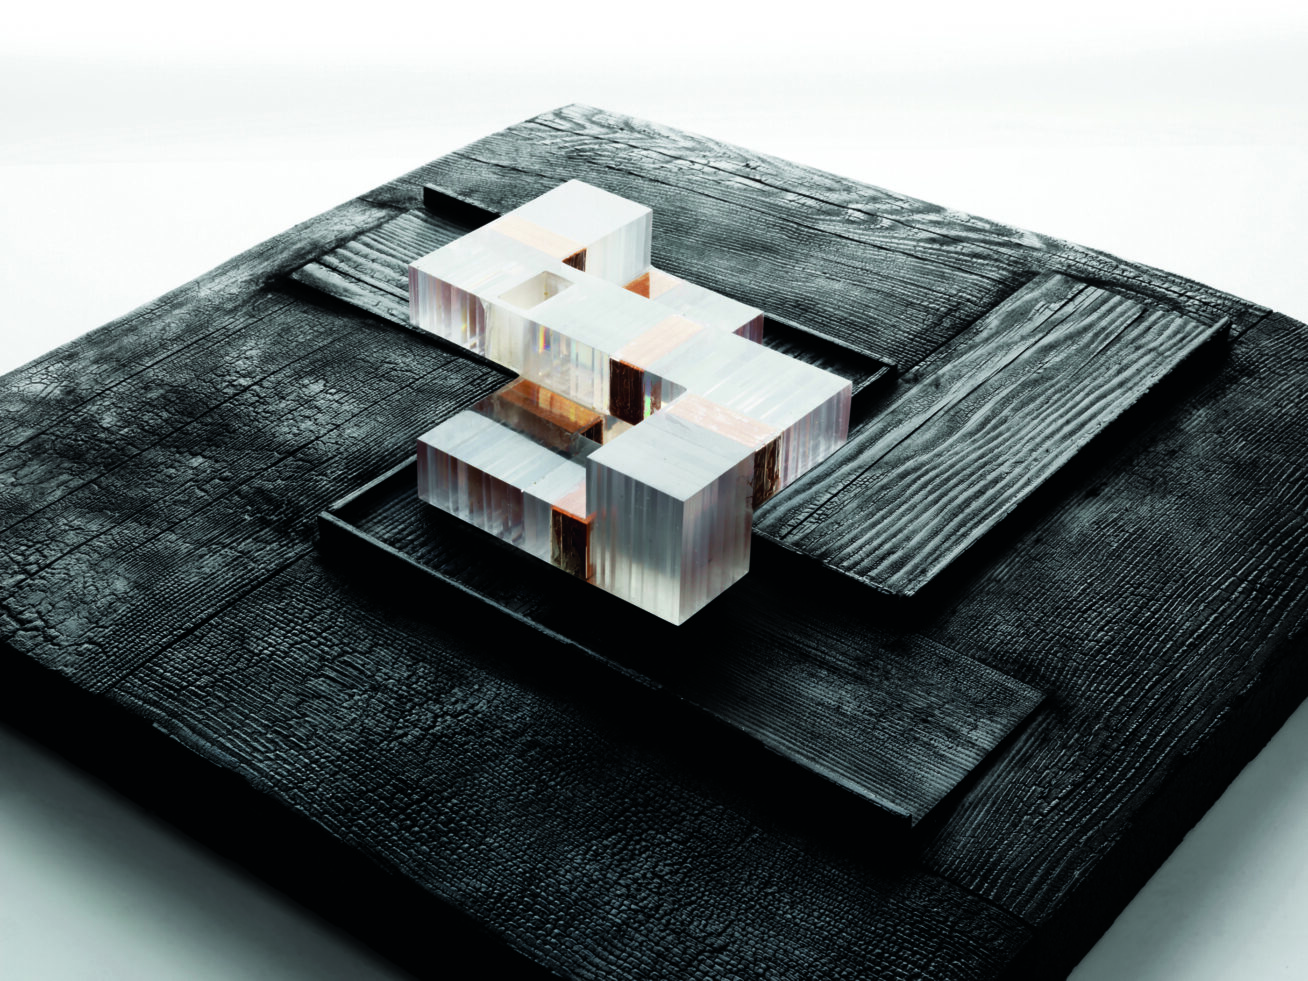 Image of a study for a house built out of wood and glass